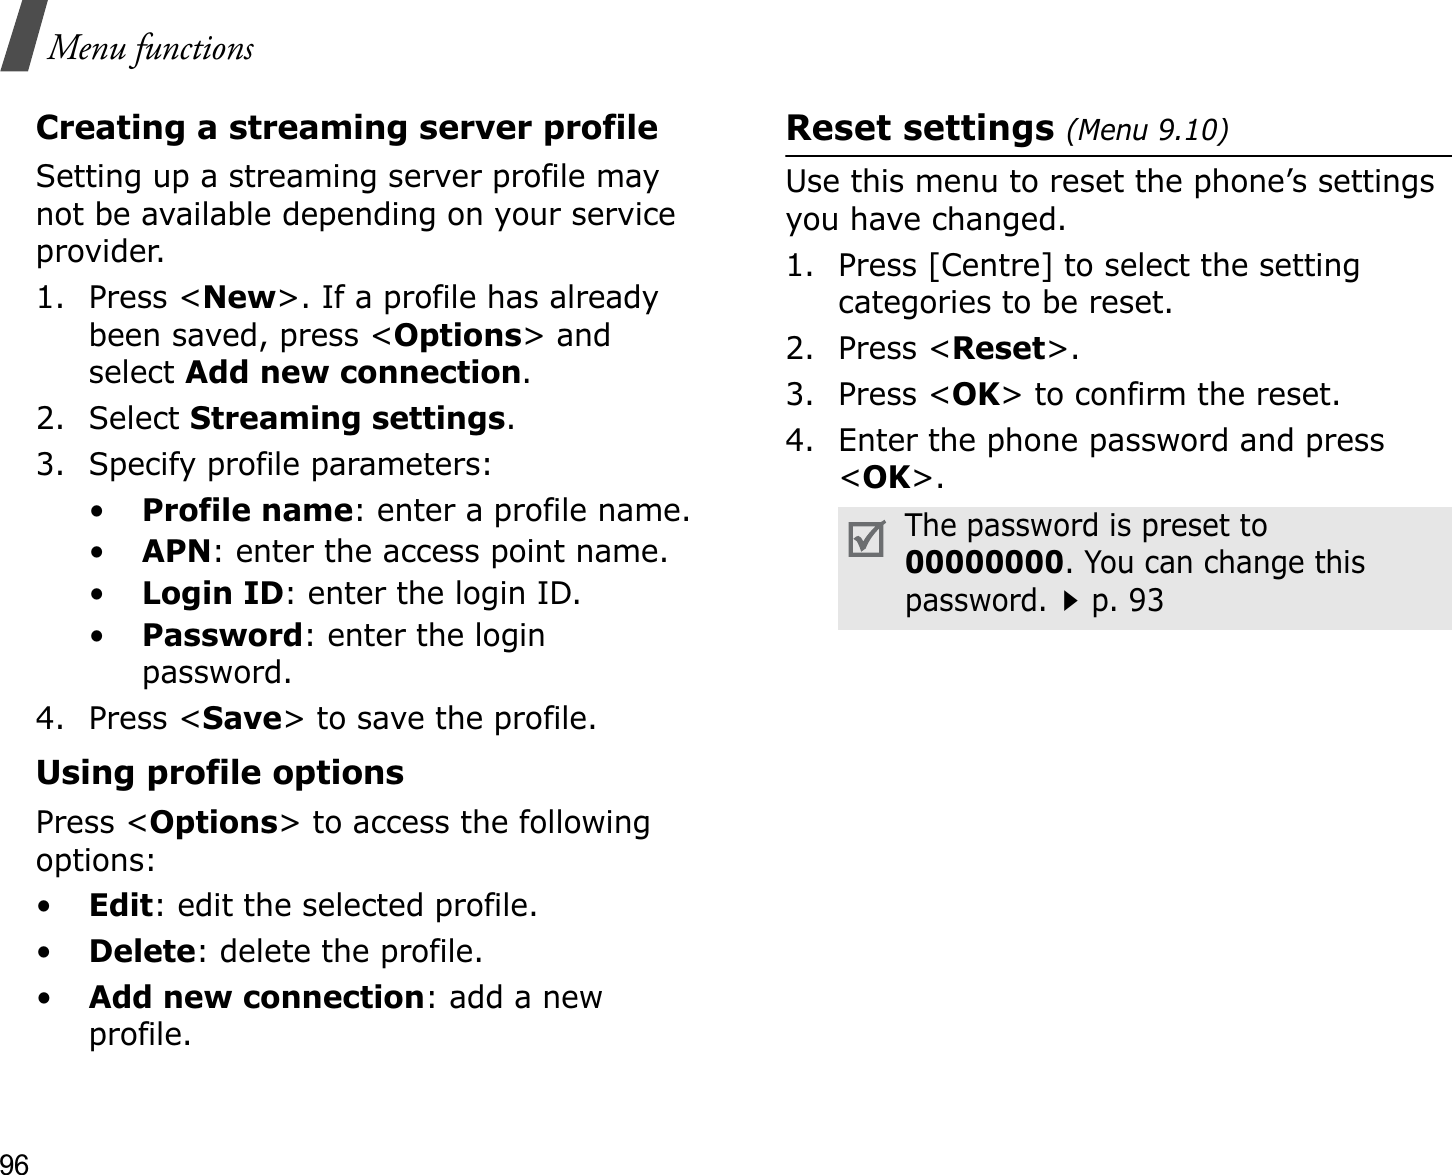 96Menu functionsCreating a streaming server profileSetting up a streaming server profile may not be available depending on your service provider.1. Press &lt;New&gt;. If a profile has already been saved, press &lt;Options&gt; and select Add new connection.2. Select Streaming settings.3. Specify profile parameters: •Profile name: enter a profile name.•APN: enter the access point name.•Login ID: enter the login ID.•Password: enter the login password.4. Press &lt;Save&gt; to save the profile.Using profile optionsPress &lt;Options&gt; to access the following options:•Edit: edit the selected profile.•Delete: delete the profile.•Add new connection: add a new profile.Reset settings (Menu 9.10)Use this menu to reset the phone’s settings you have changed.1. Press [Centre] to select the setting categories to be reset. 2. Press &lt;Reset&gt;.3. Press &lt;OK&gt; to confirm the reset.4. Enter the phone password and press &lt;OK&gt;.The password is preset to 00000000. You can change this password.p. 93